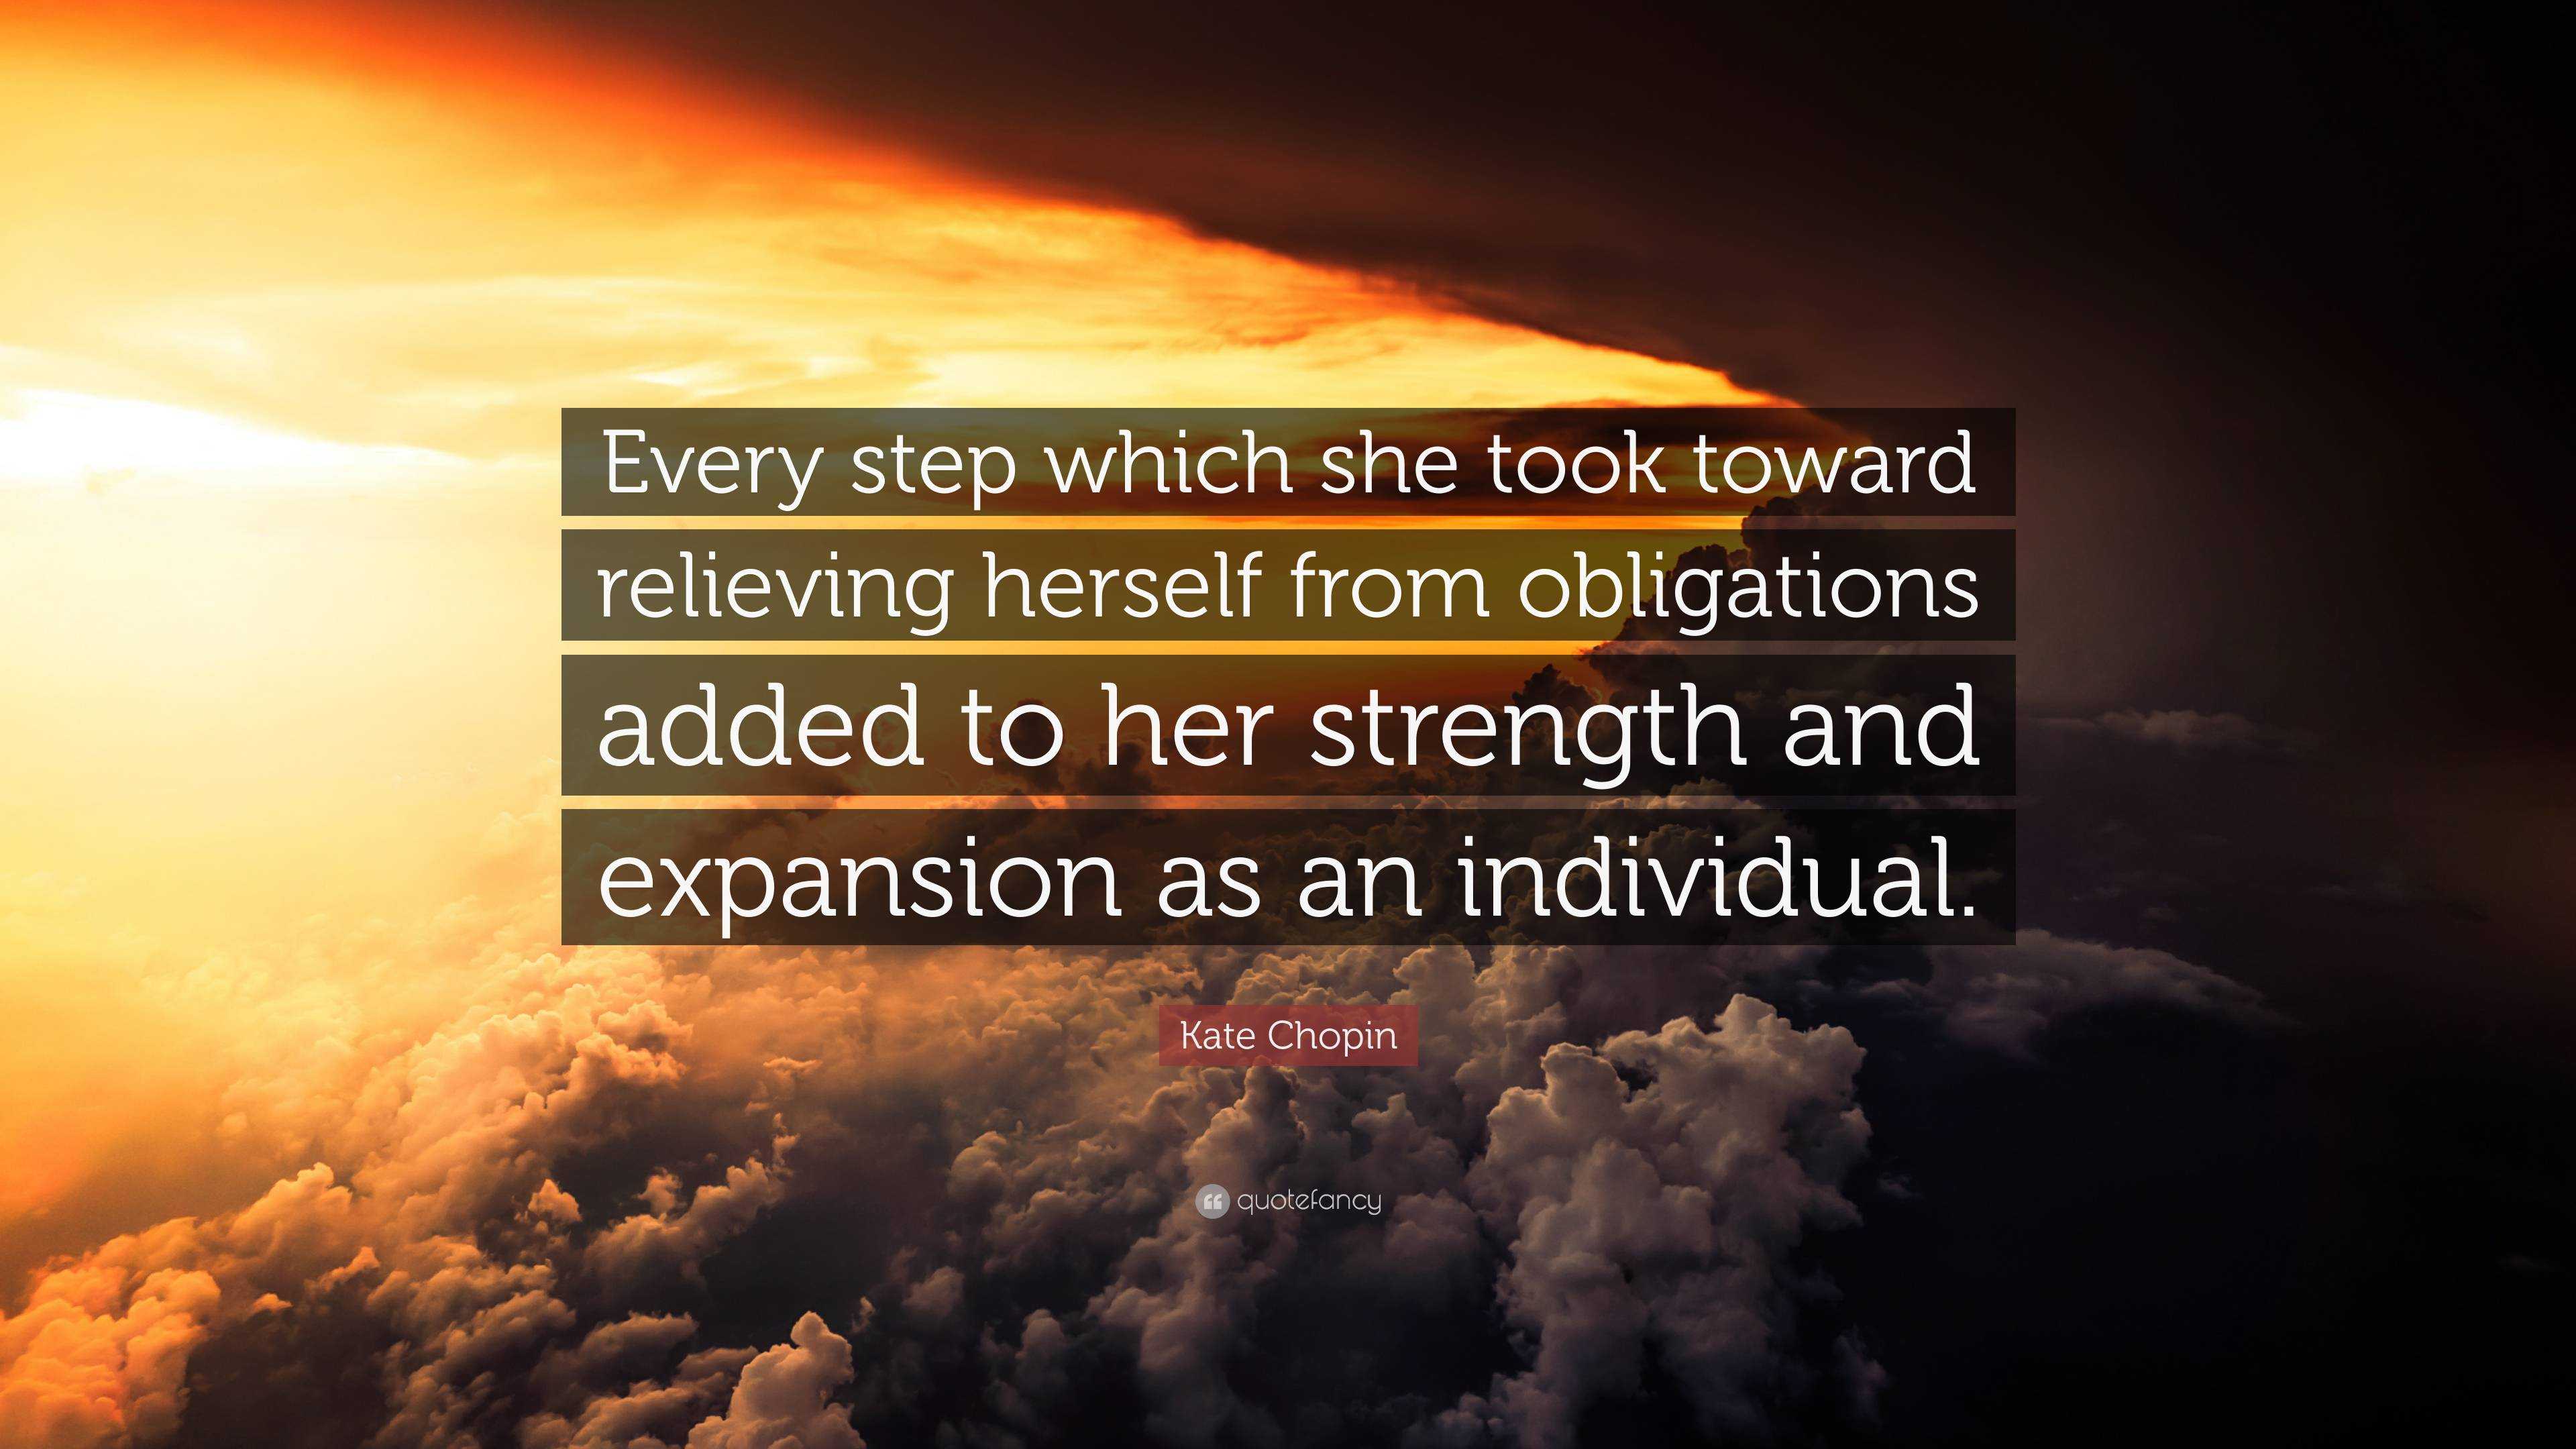 Kate Chopin Quote: “Every step which she took toward relieving herself ...